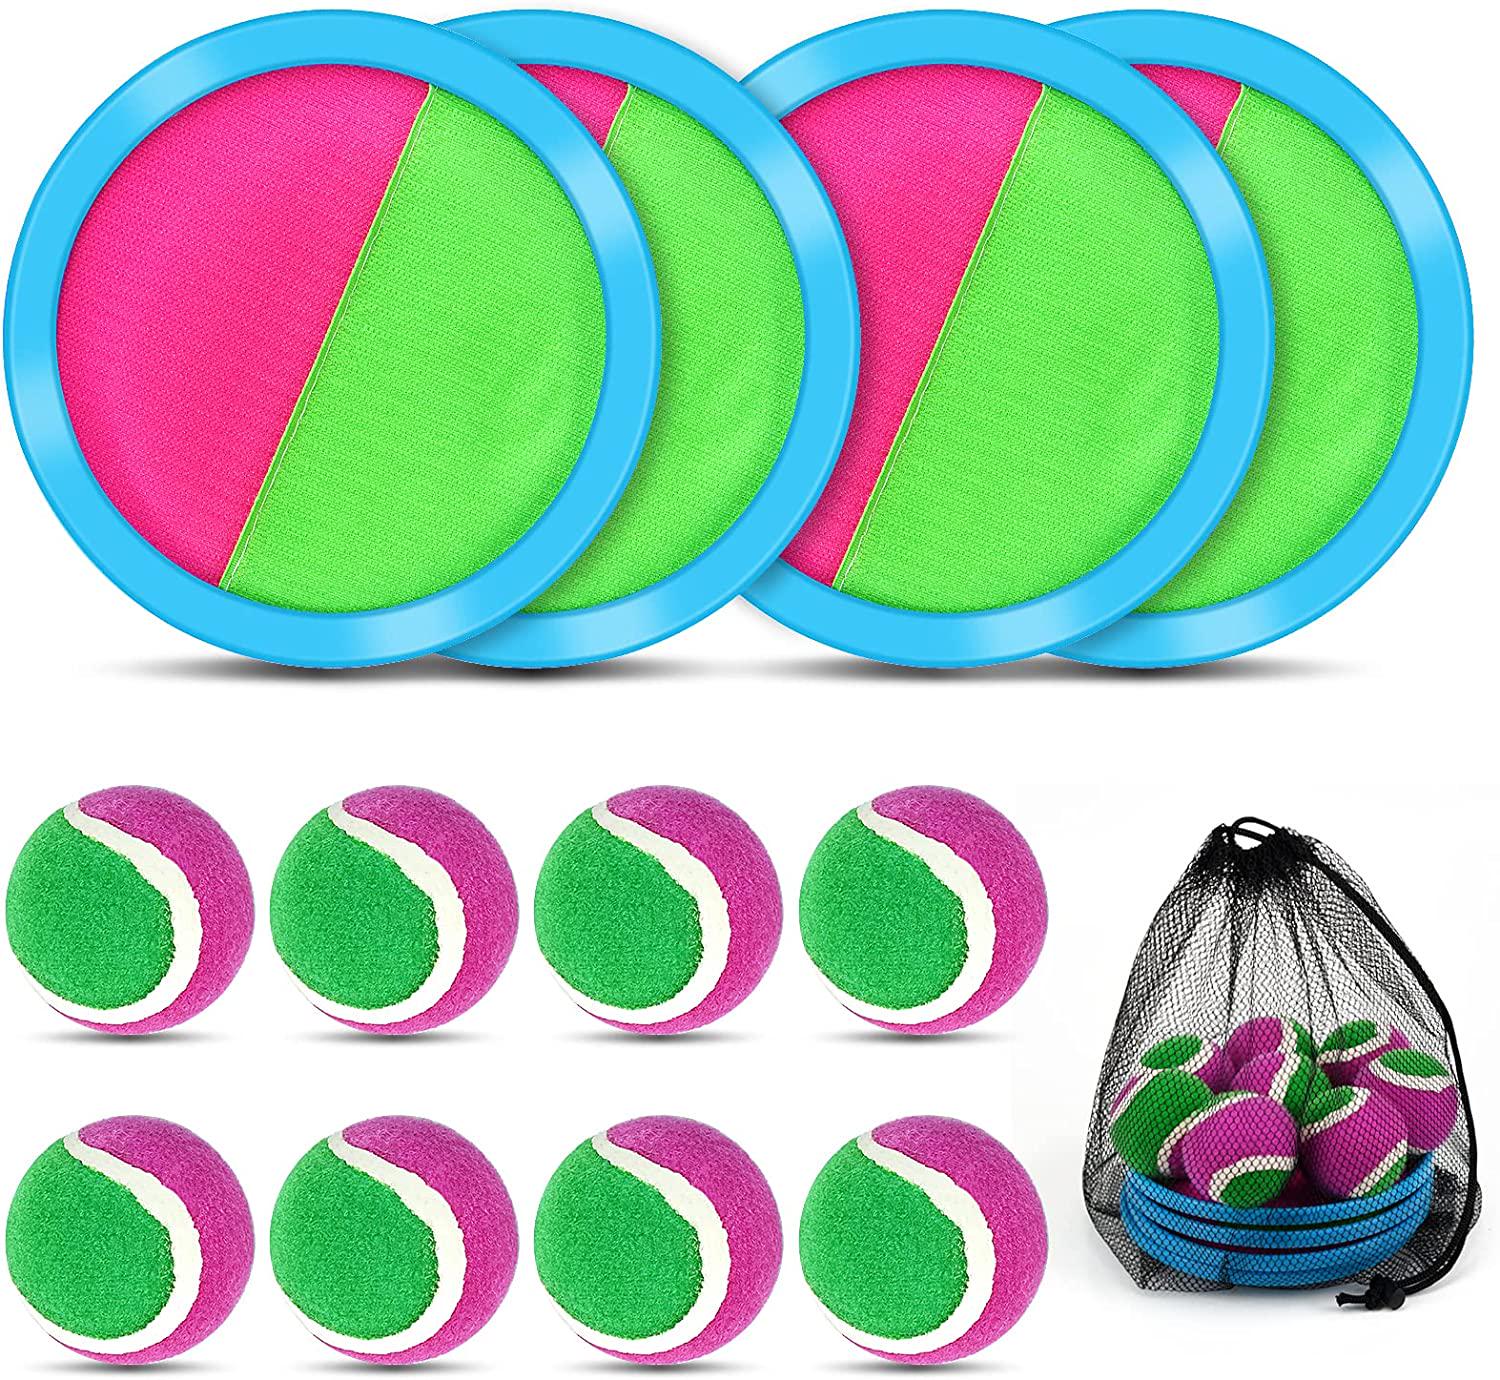 MENOLY, MENOLY Toss and Catch Ball Set for Kids, Paddle Ball Games Set, Sticky Ball Catch Game with 4 Paddles 8 Balls for Outdoor Games, Beach, Yard